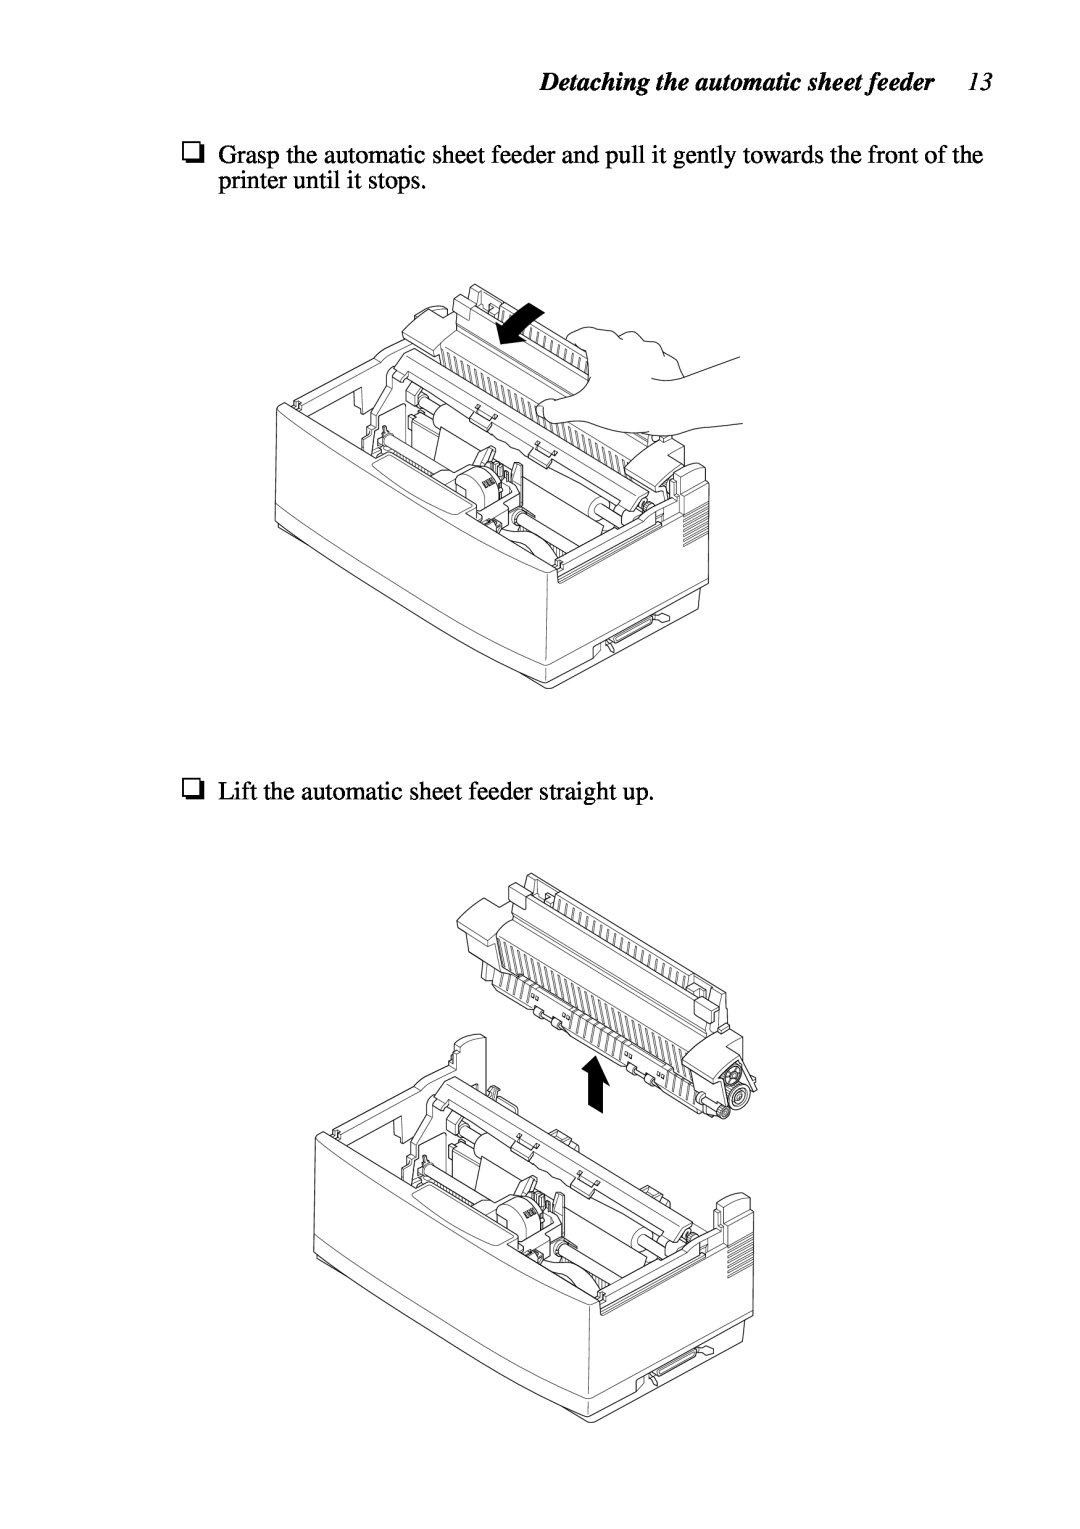 Star Micronics LC-90 NX-1010 user manual Detaching the automatic sheet feeder, Lift the automatic sheet feeder straight up 